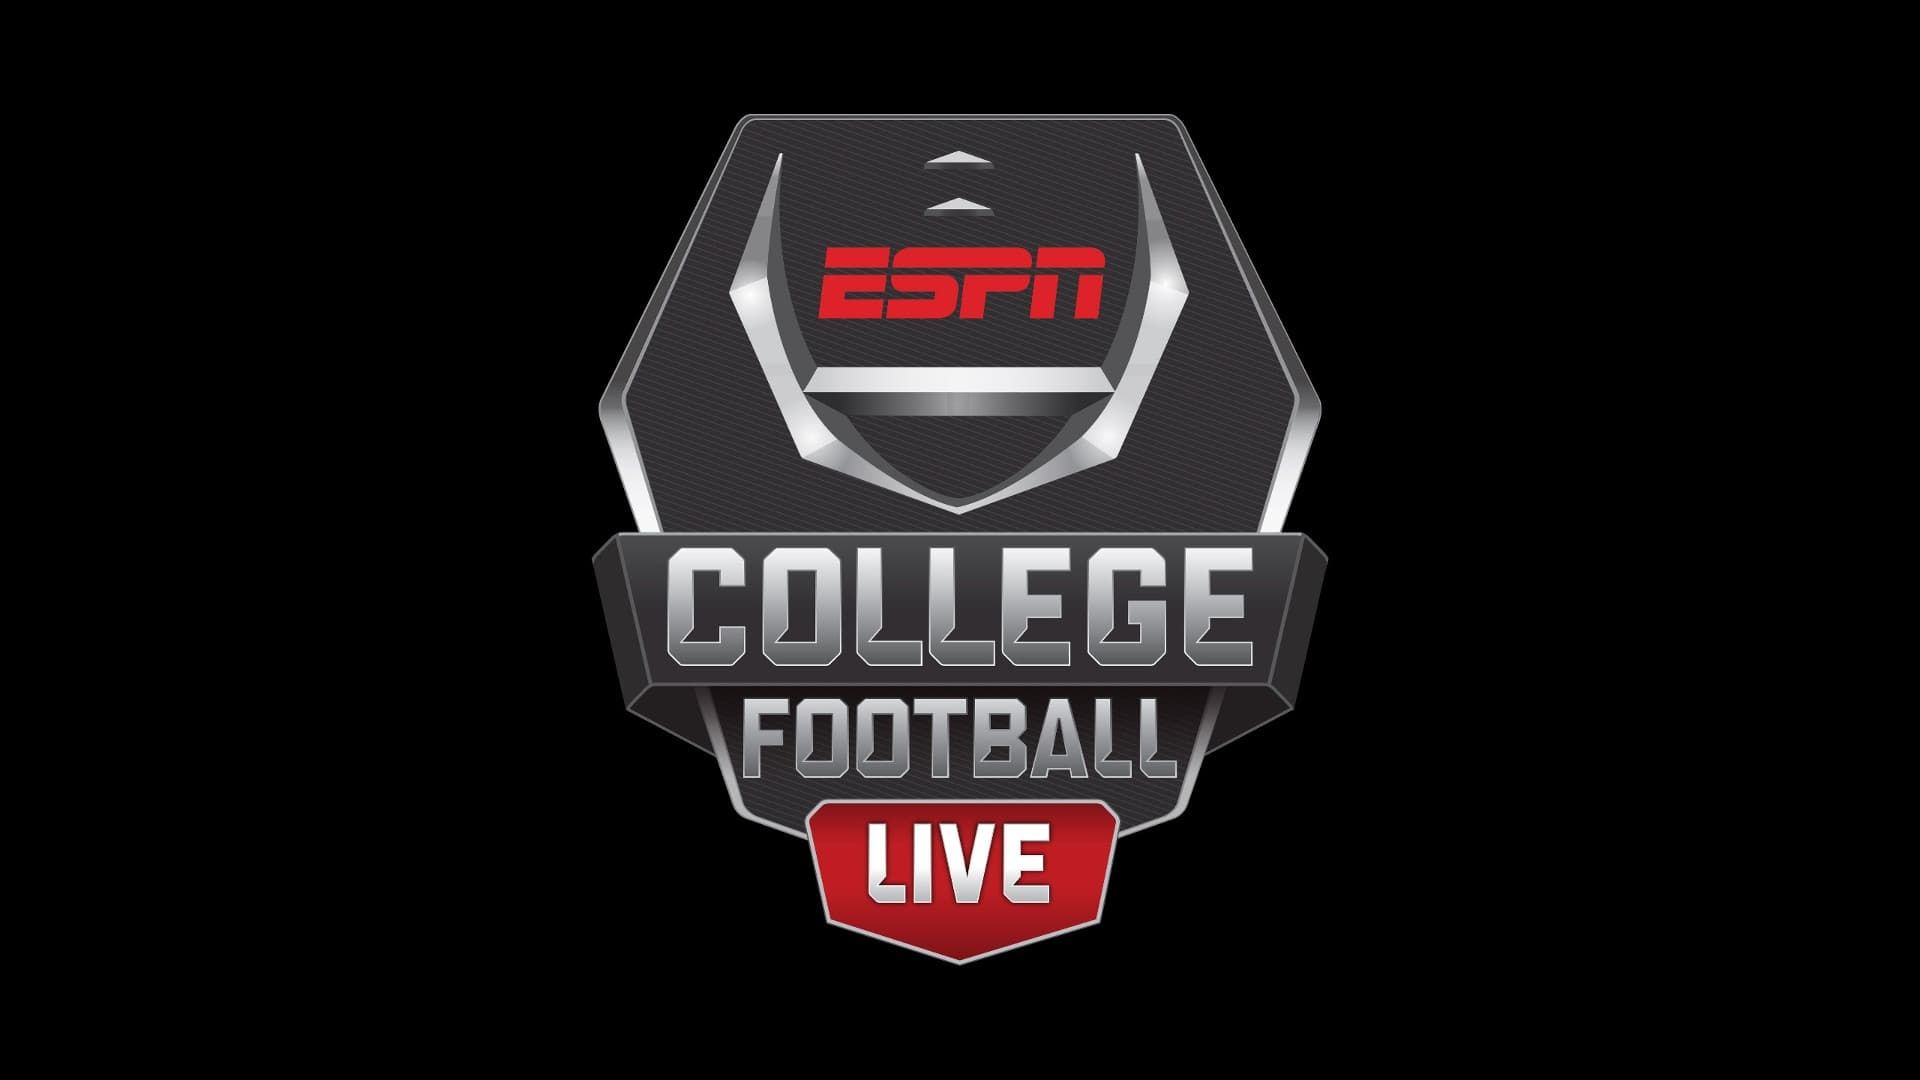 College Football Live background